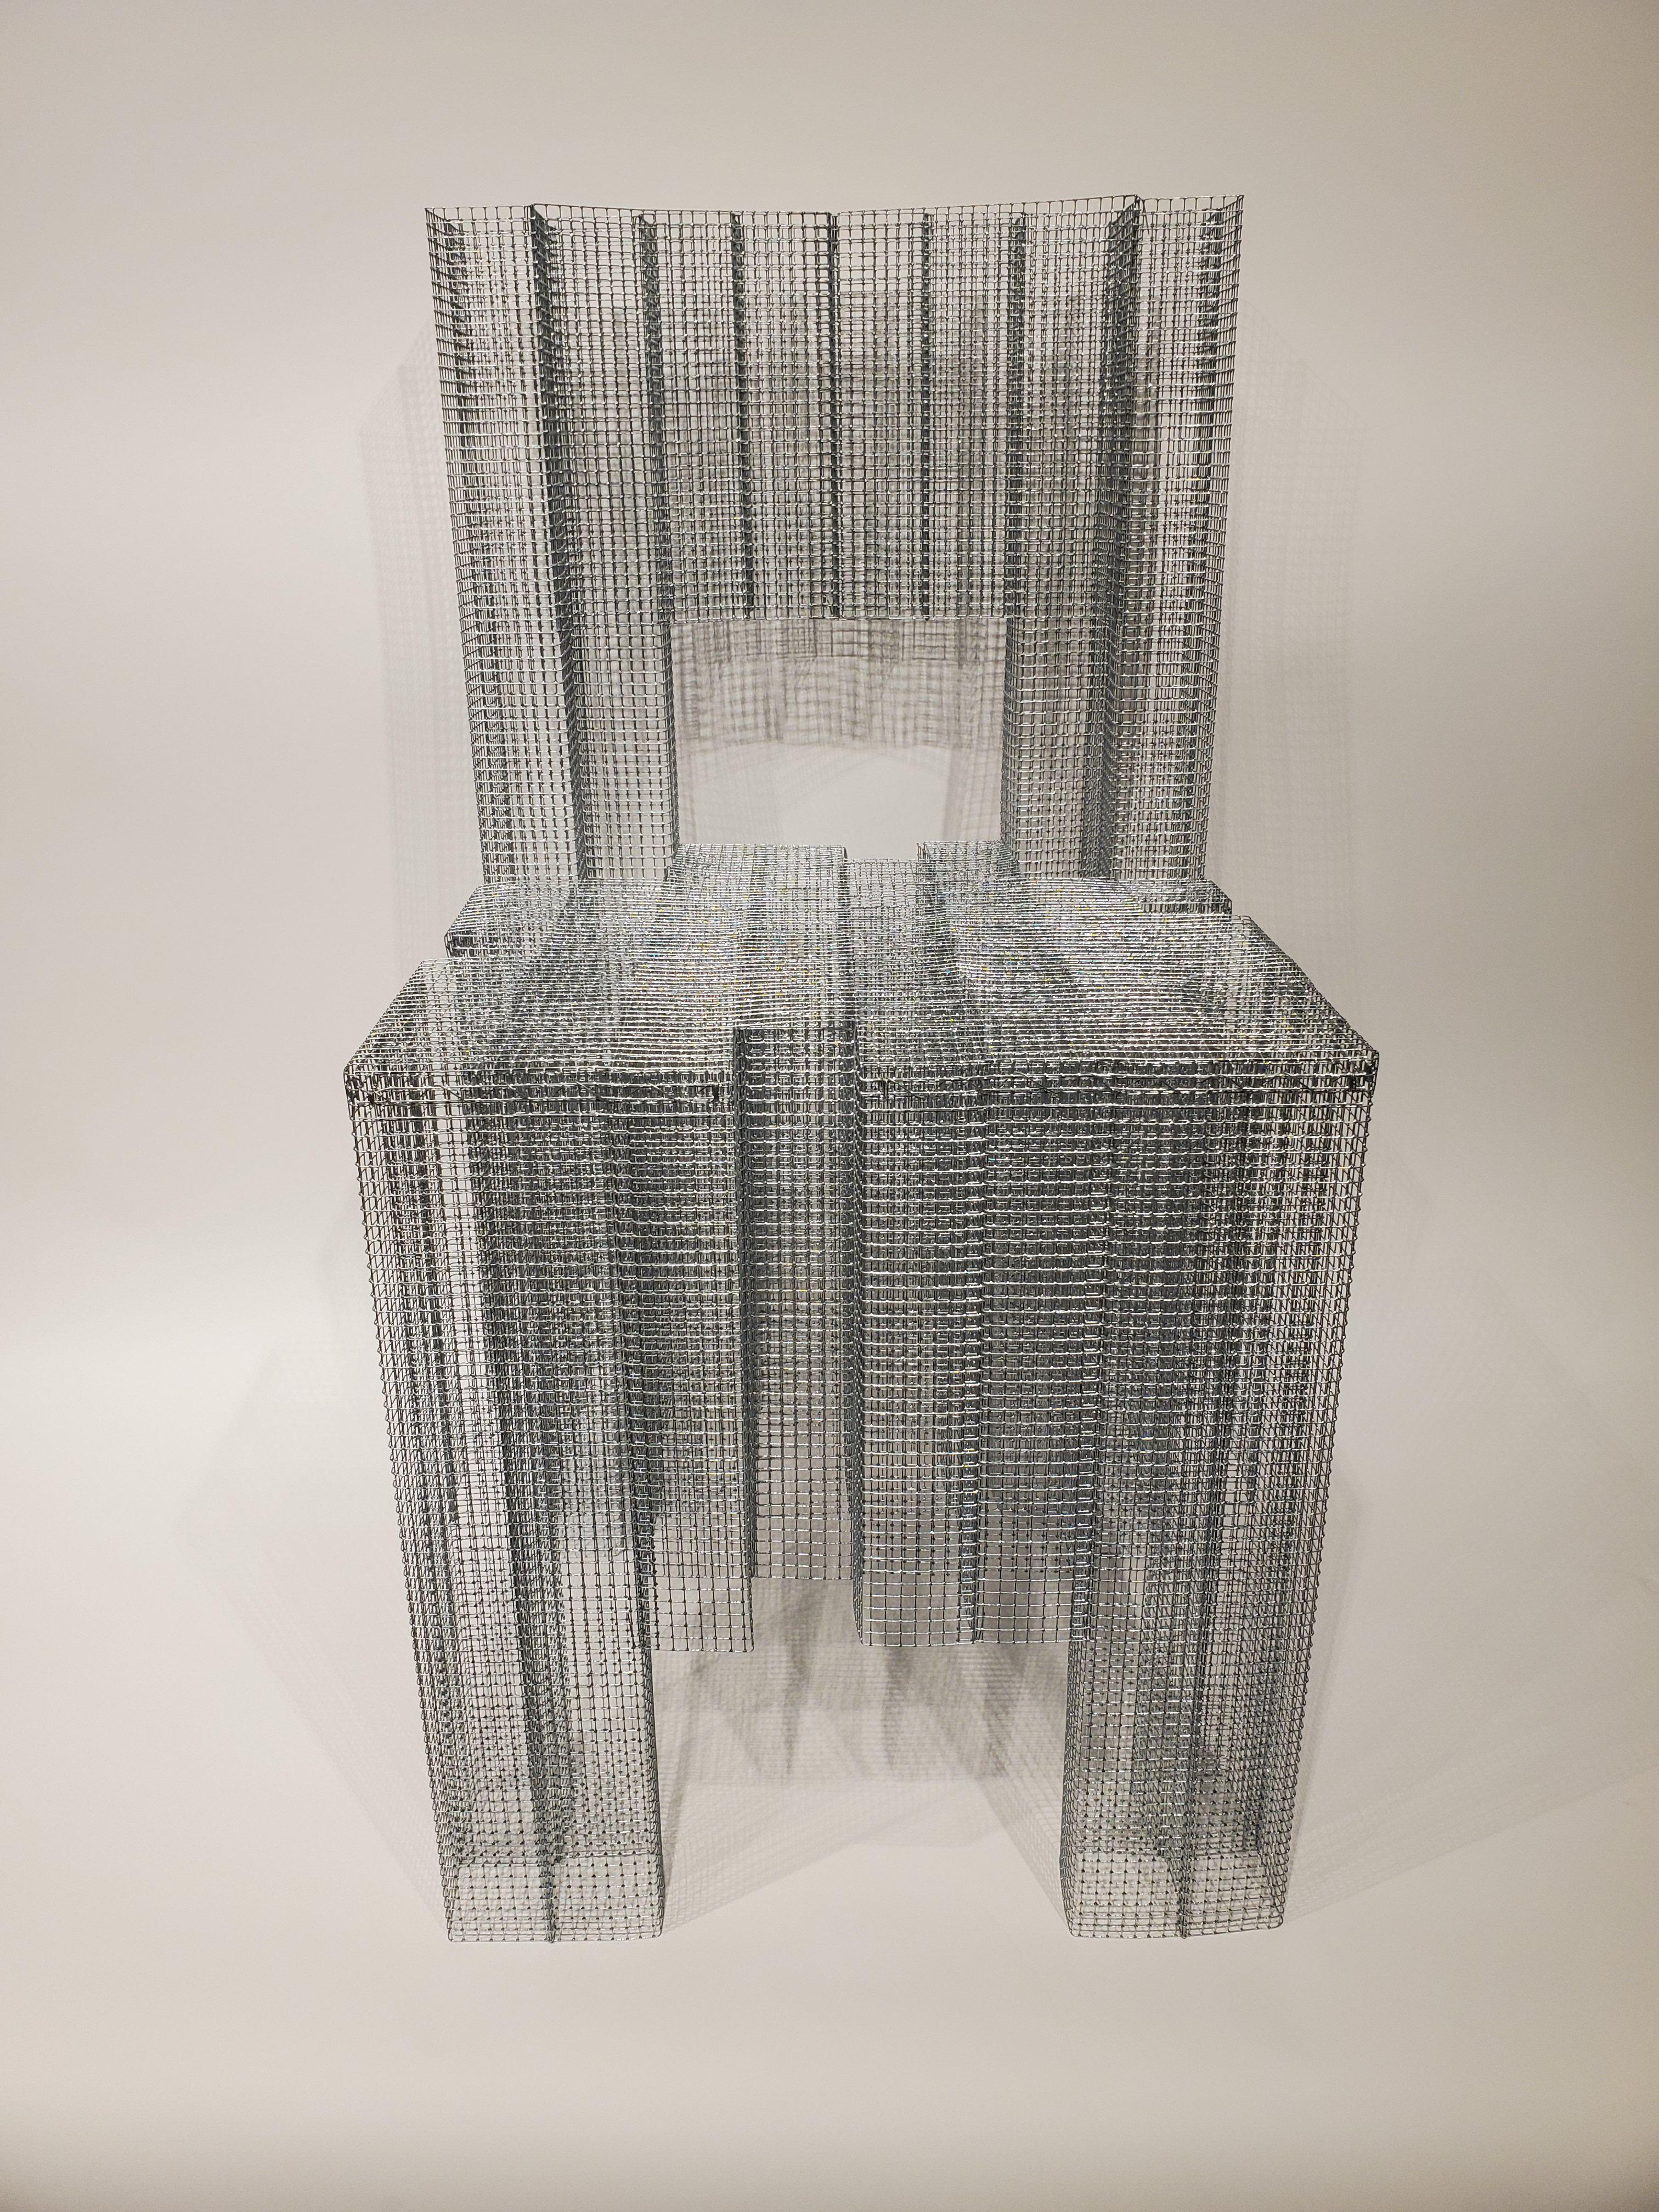 Voukenas Petrides
Blur chair
Zinc-coated wire mesh,
2019

Voukenas Petrides is a design studio based in New York and Athens. Furniture designer Andreas Voukenas and architect Steven Petrides combine their talents to produce poetic furniture